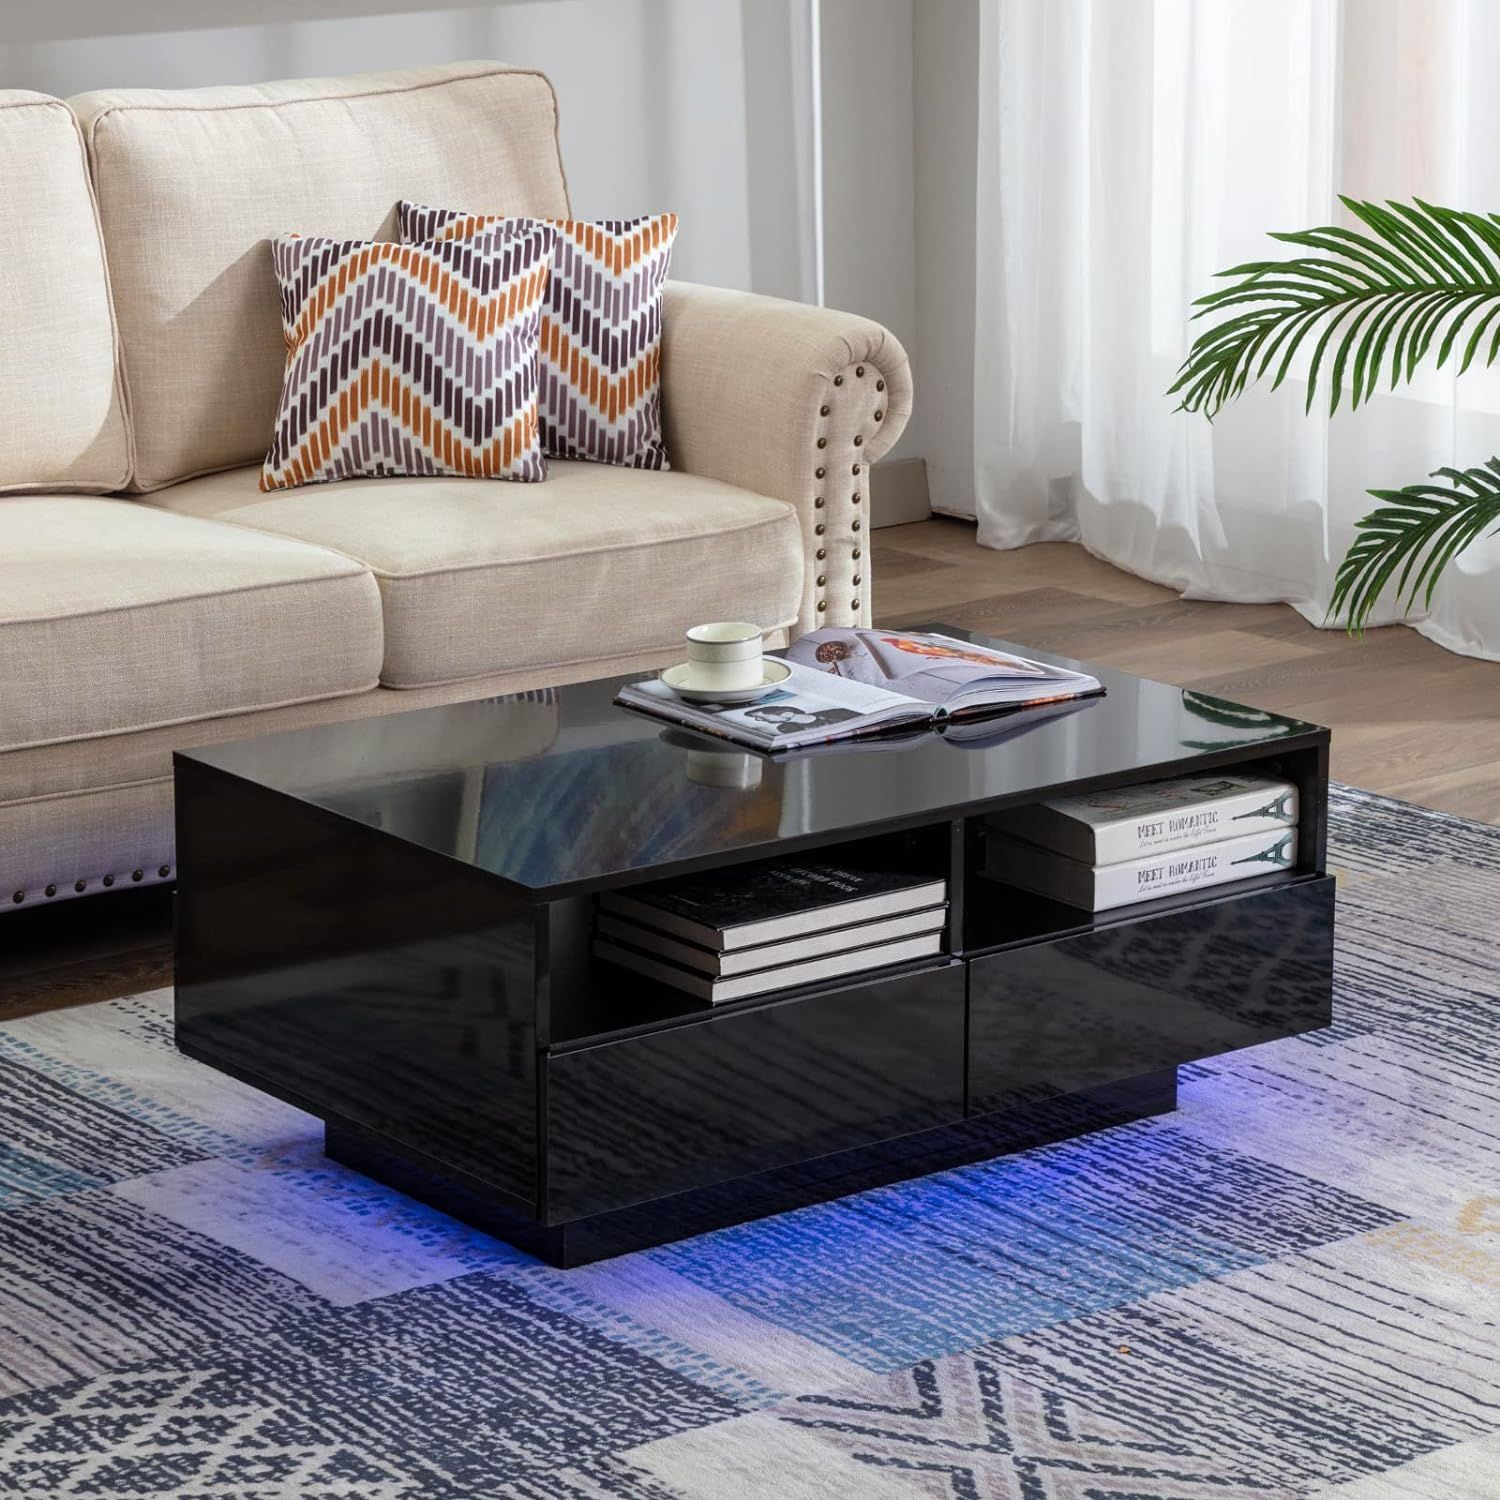 Buy Vastair Led Coffee Table For Living Room – Modern High Gloss Coffee With Regard To Led Coffee Tables With 4 Drawers (View 3 of 20)